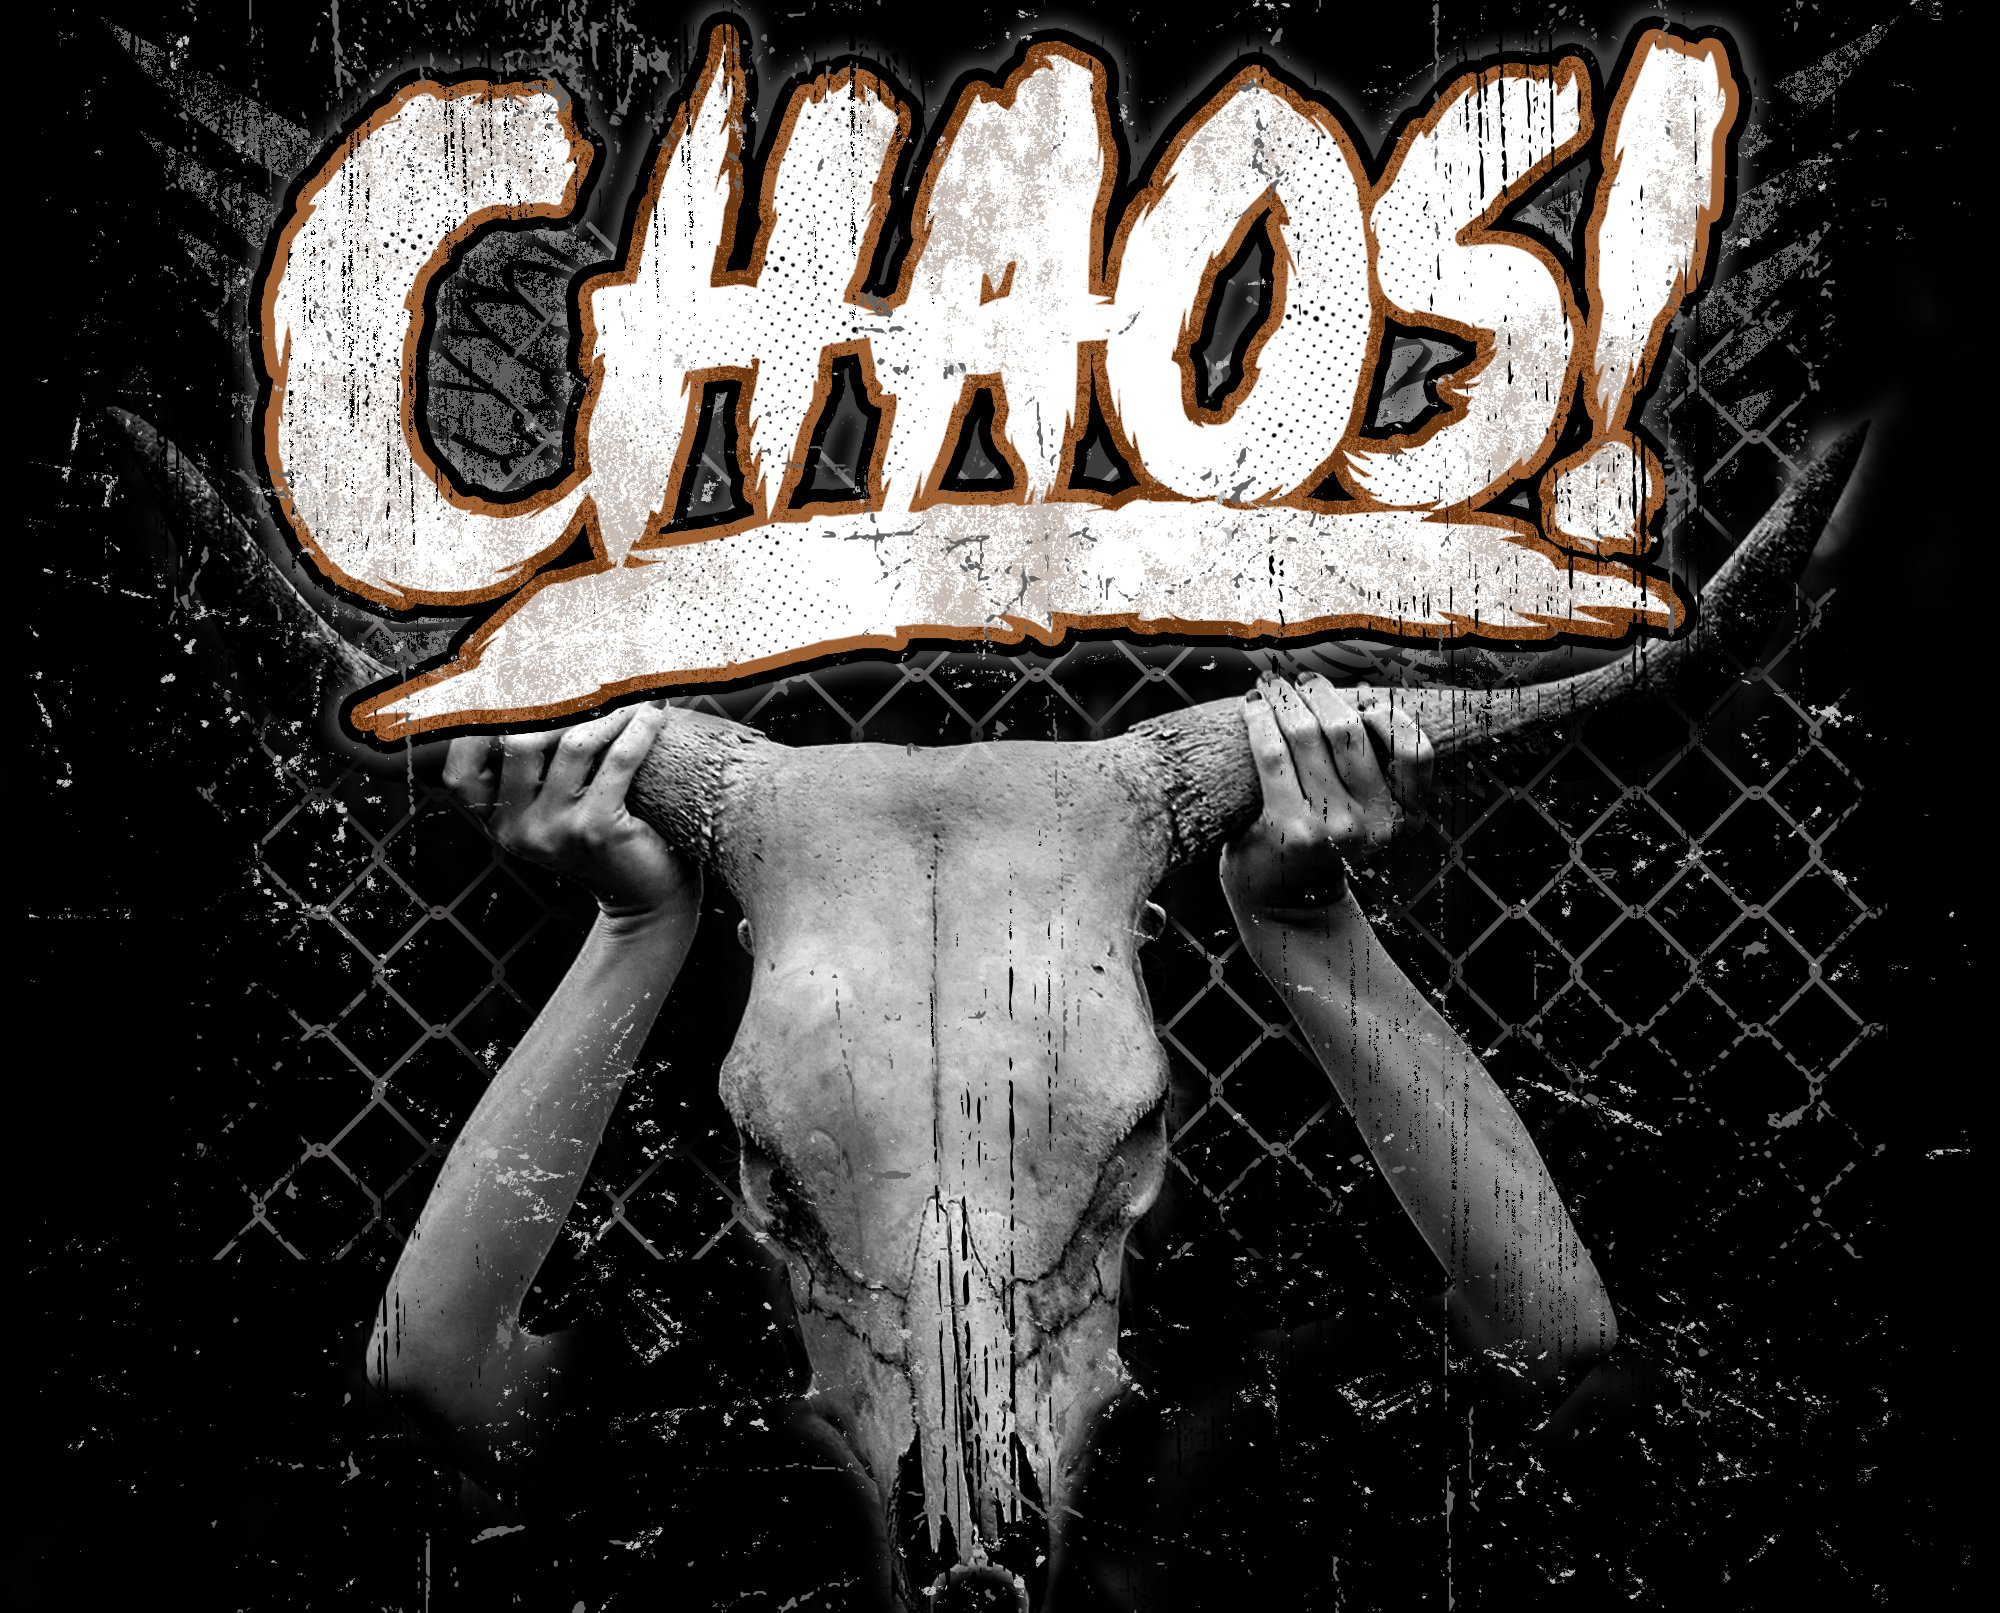 CHAOS! cover image.